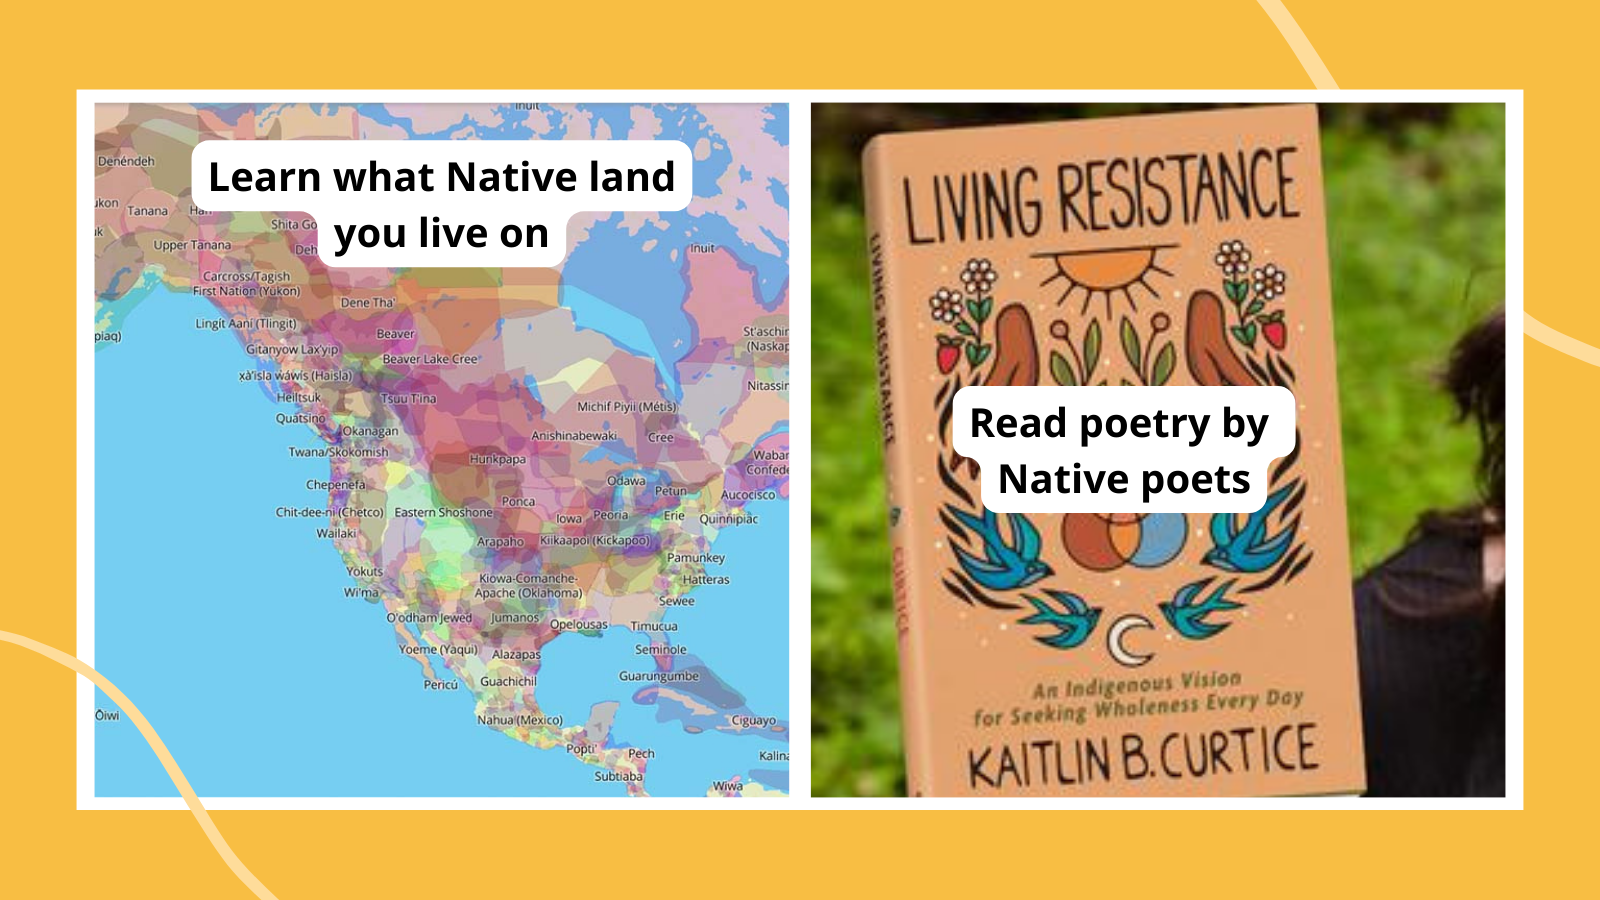 Ways to celebrate Native American Heritage Month, including learning which Native land you live on and reading poetry by Native poets.